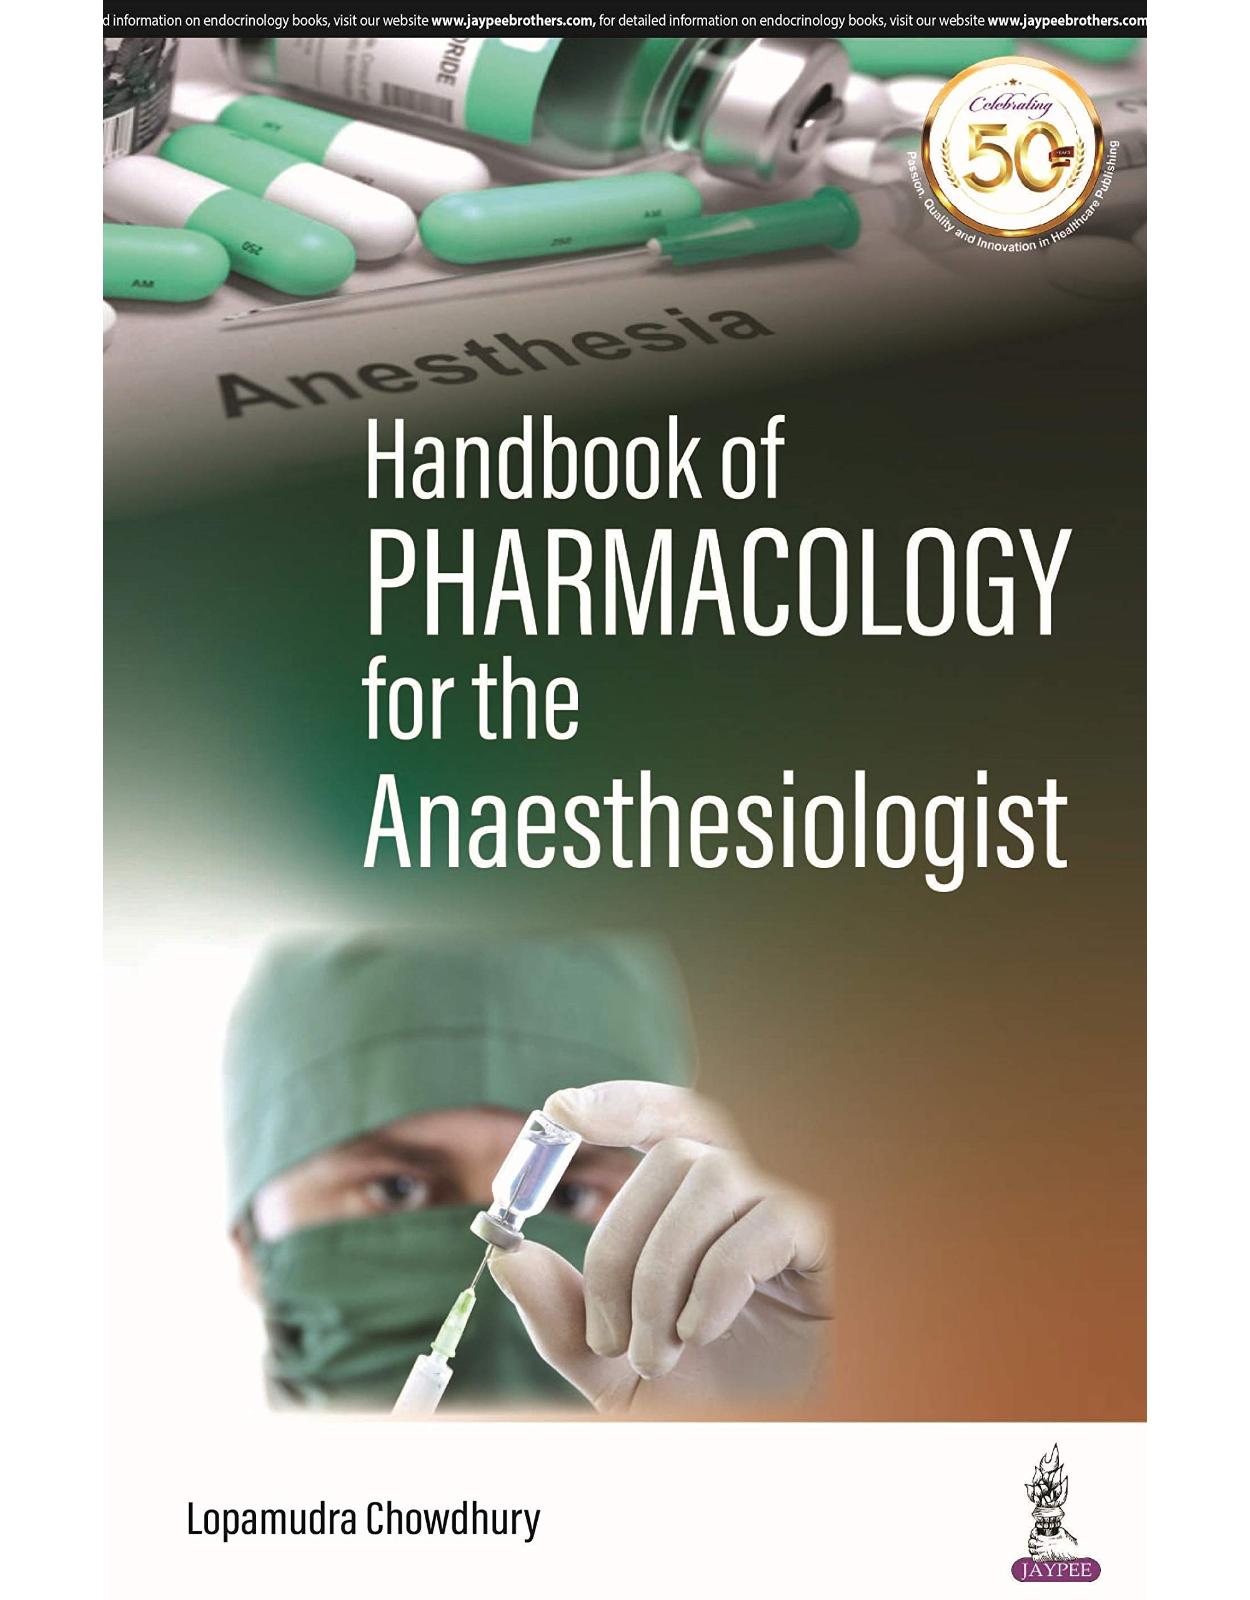 Handbook of Pharmacology for the Anaesthesiologist